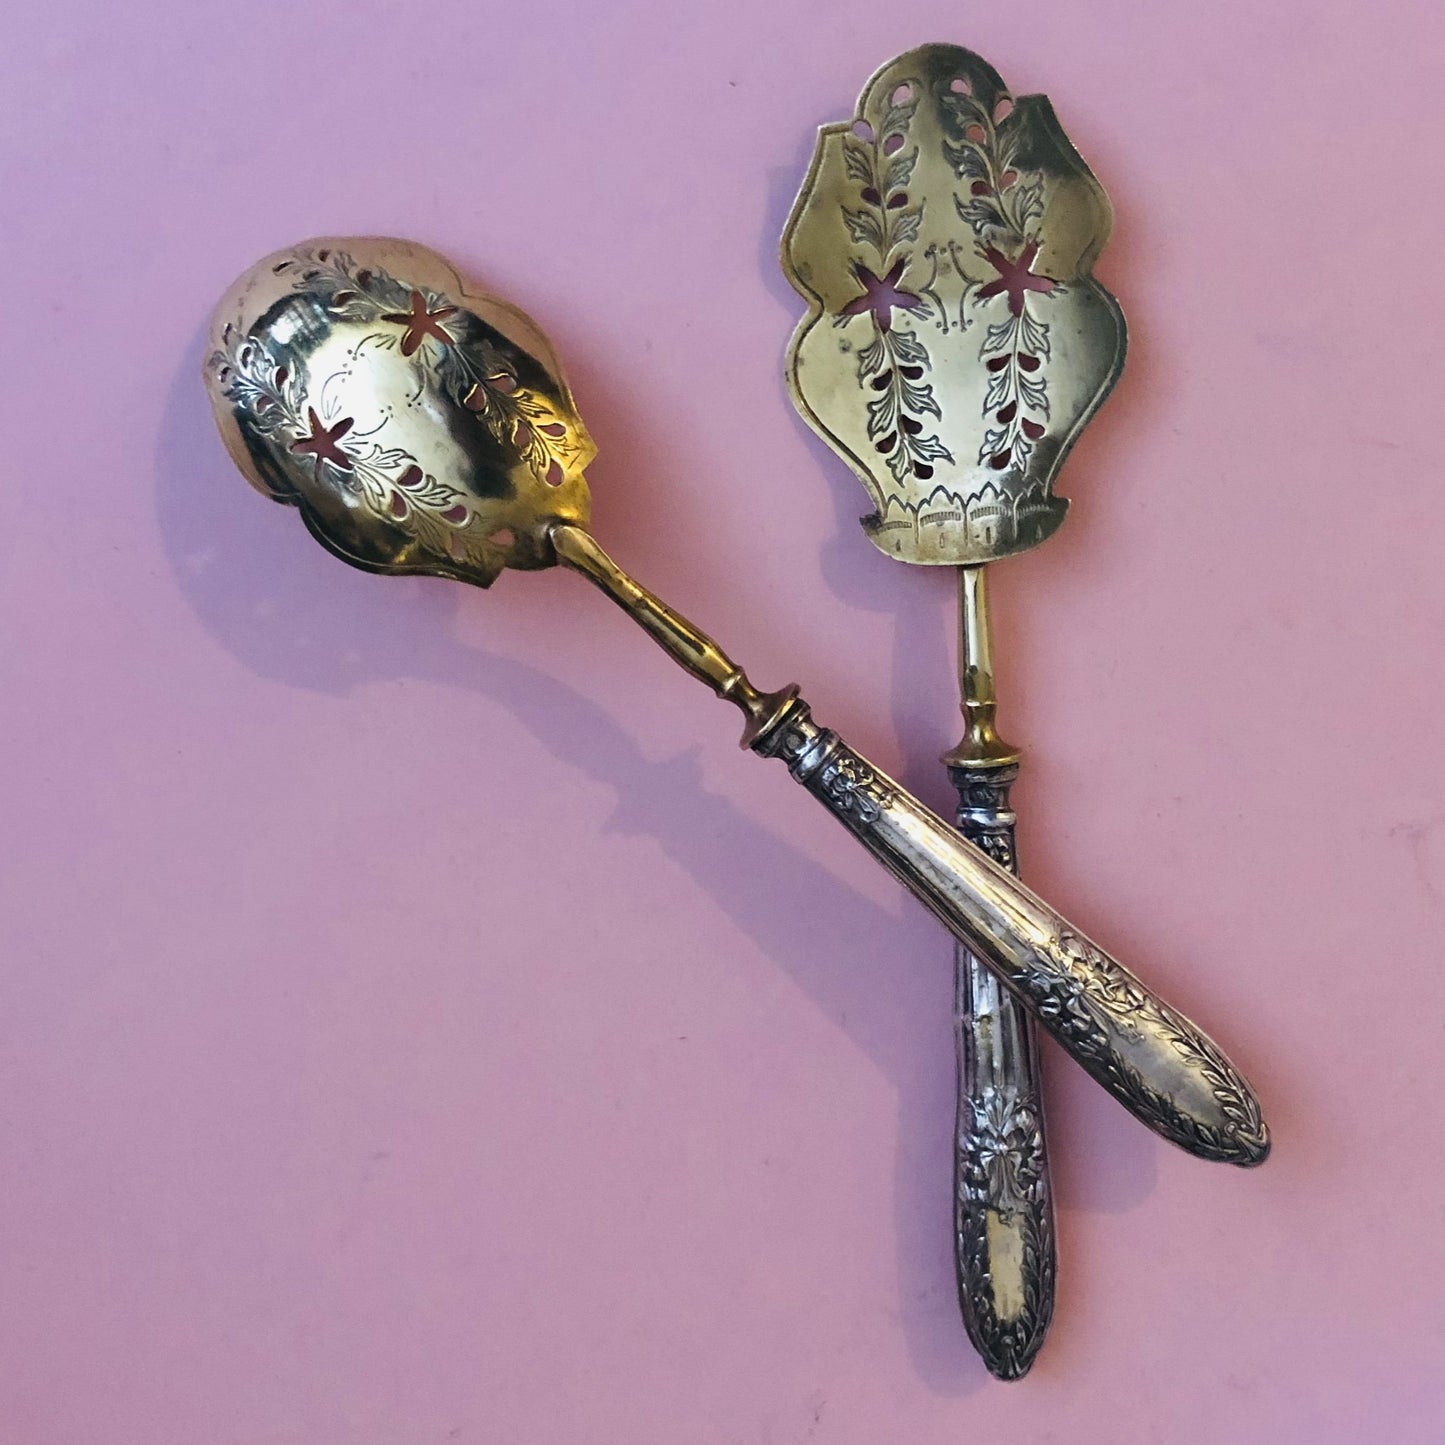 Antique Silver French Dessert Hors D'Oeuvre Spoons, Repose Handles